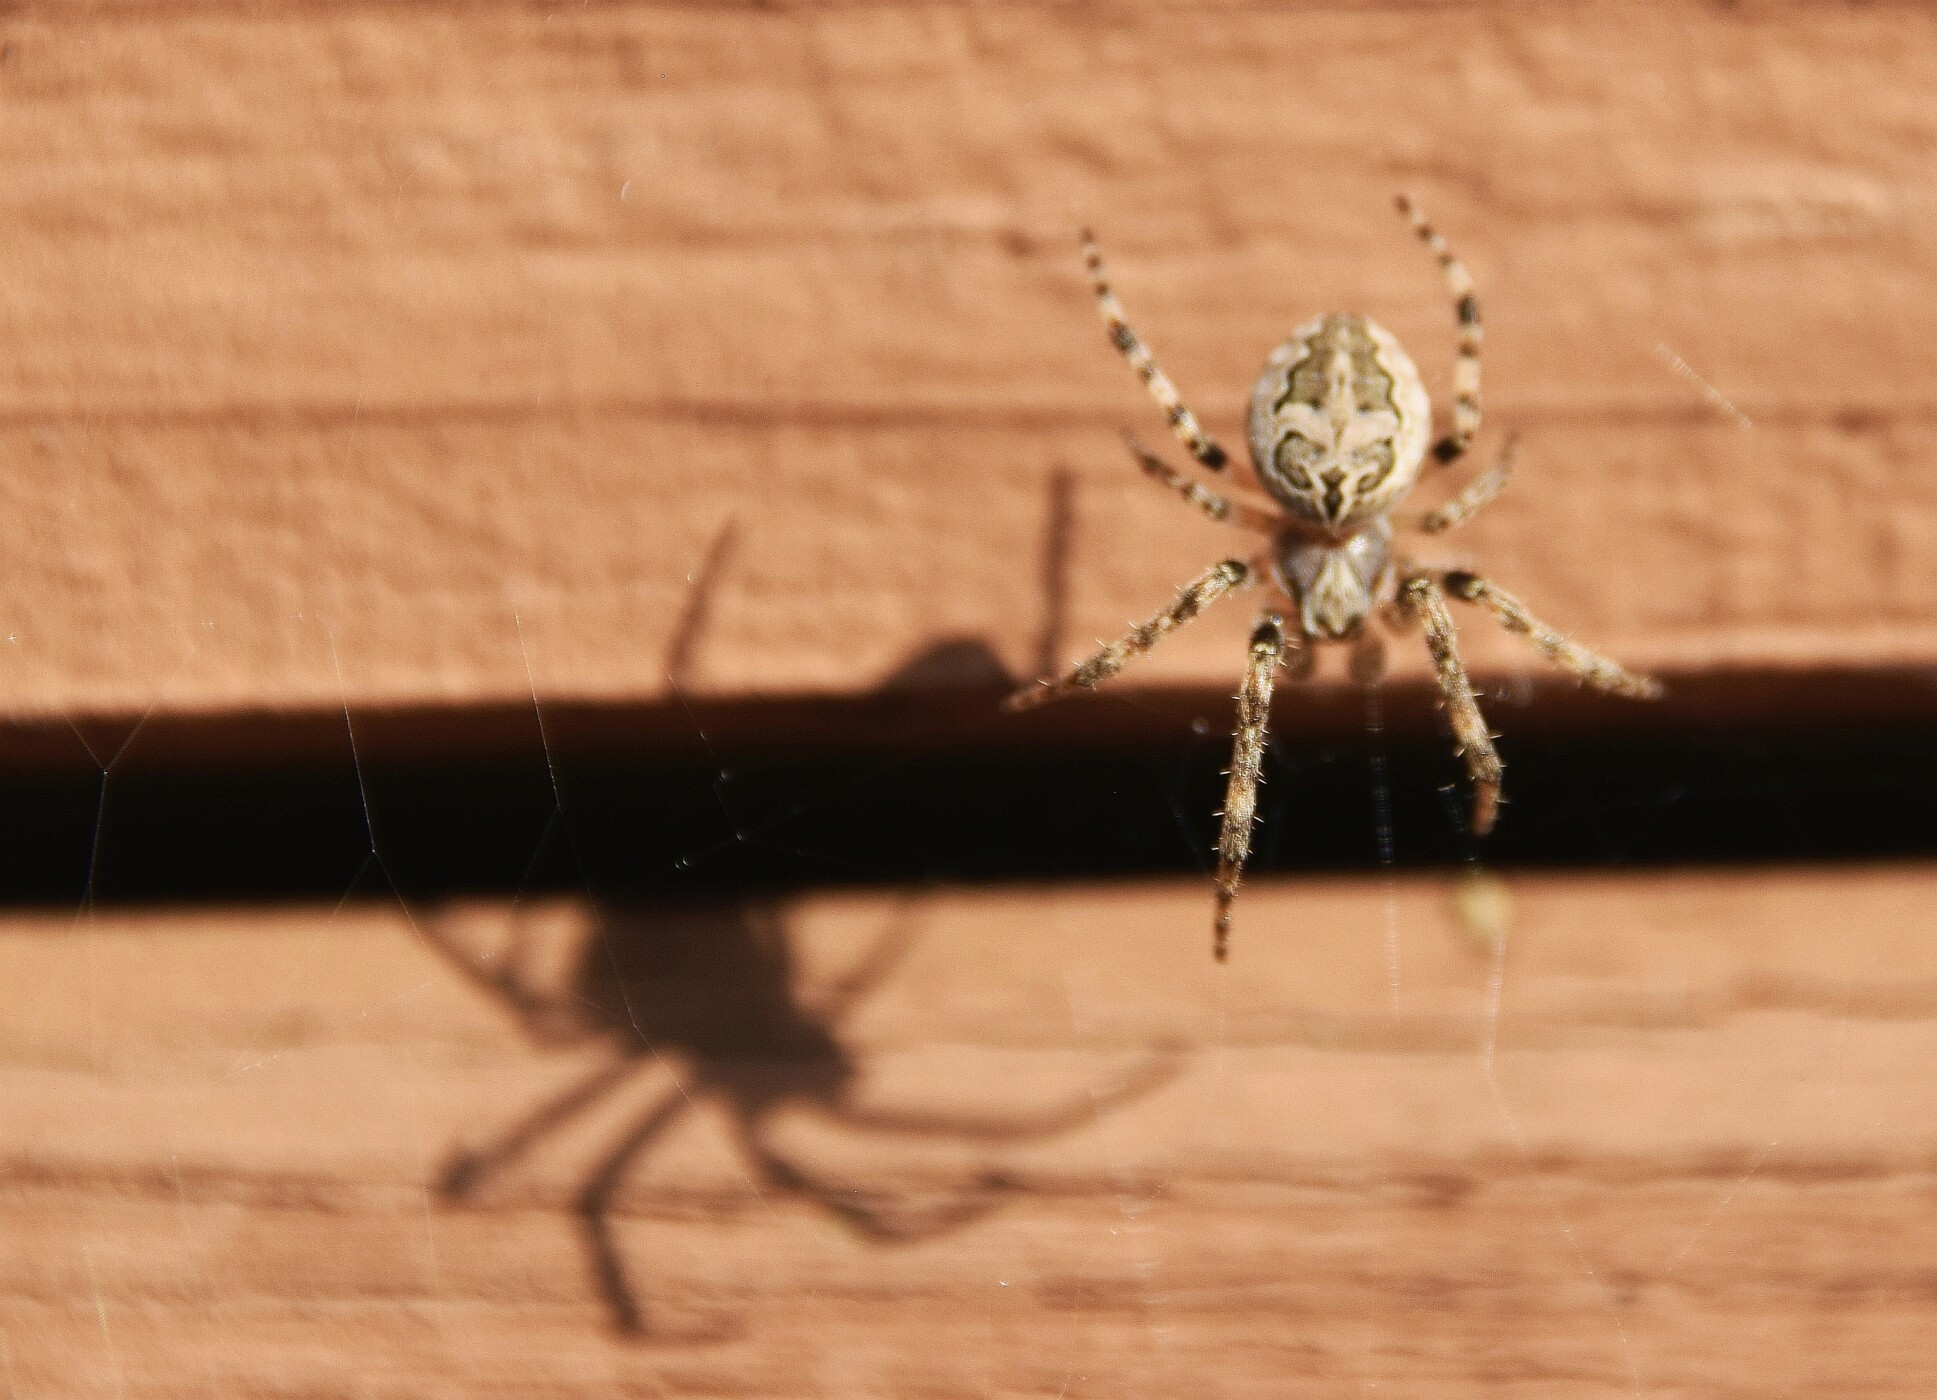 Tangled in a Web: Learn About Spiders